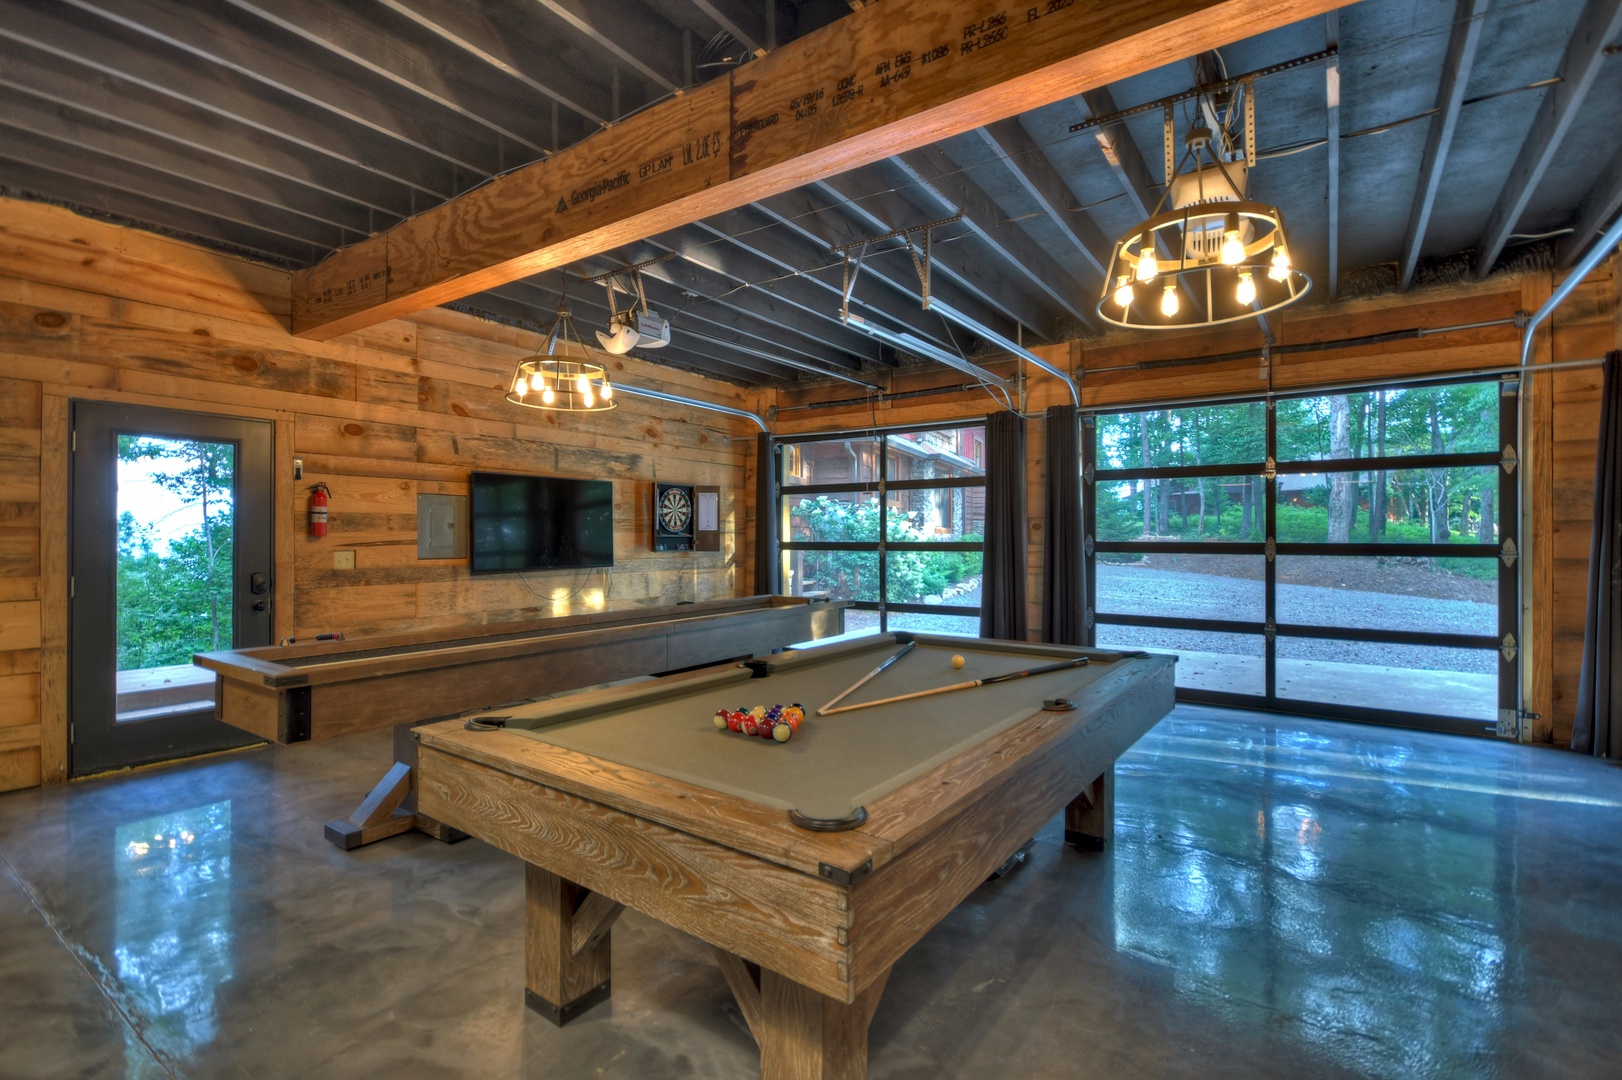 Heavenly Day - Bonus Game Garage with Pool Table